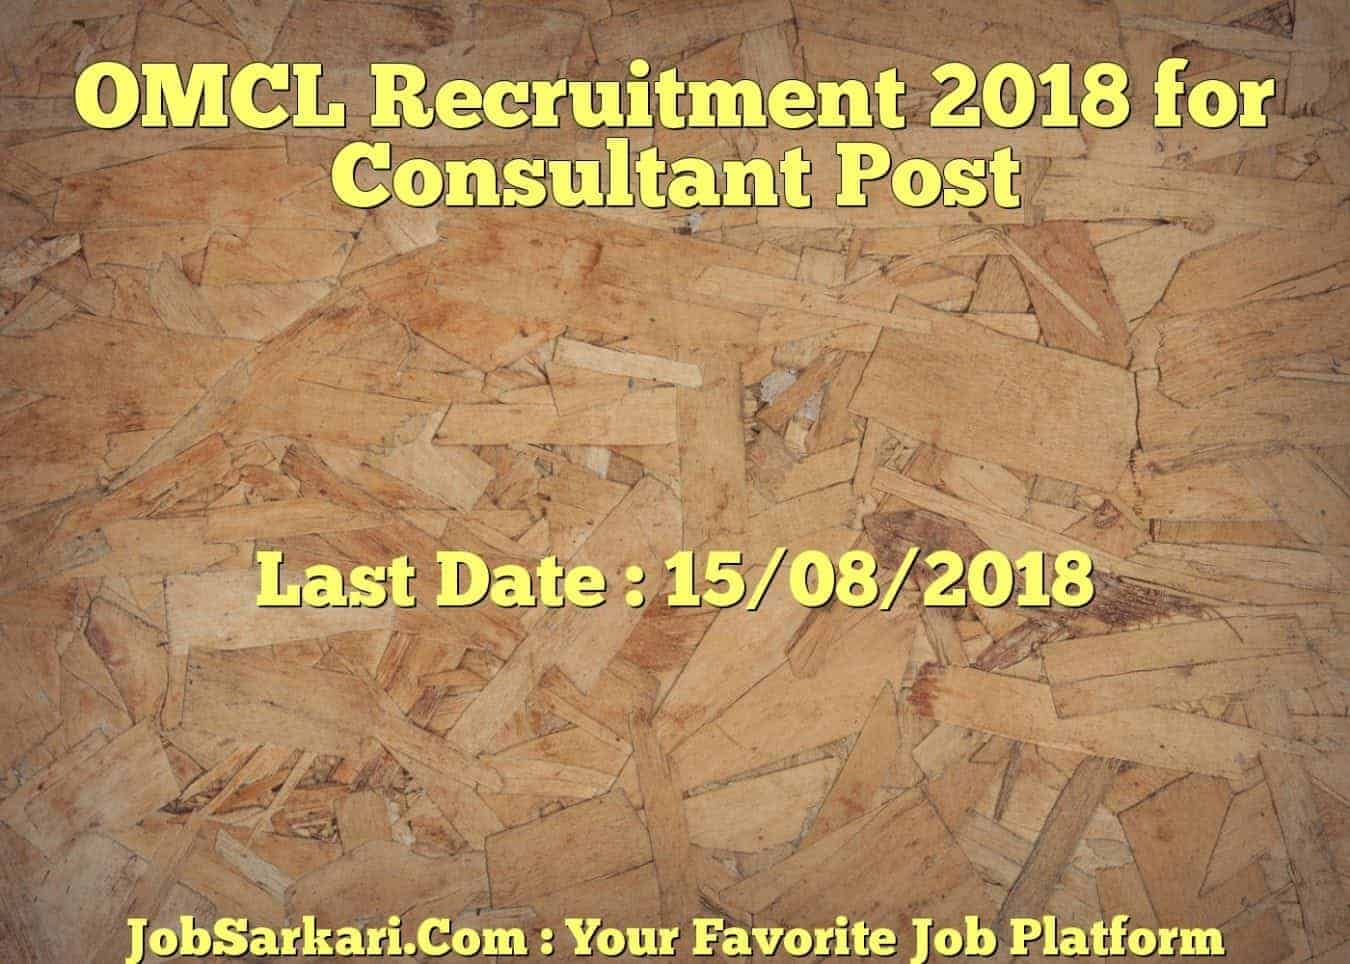 OMCL Recruitment 2018 for Consultant Post